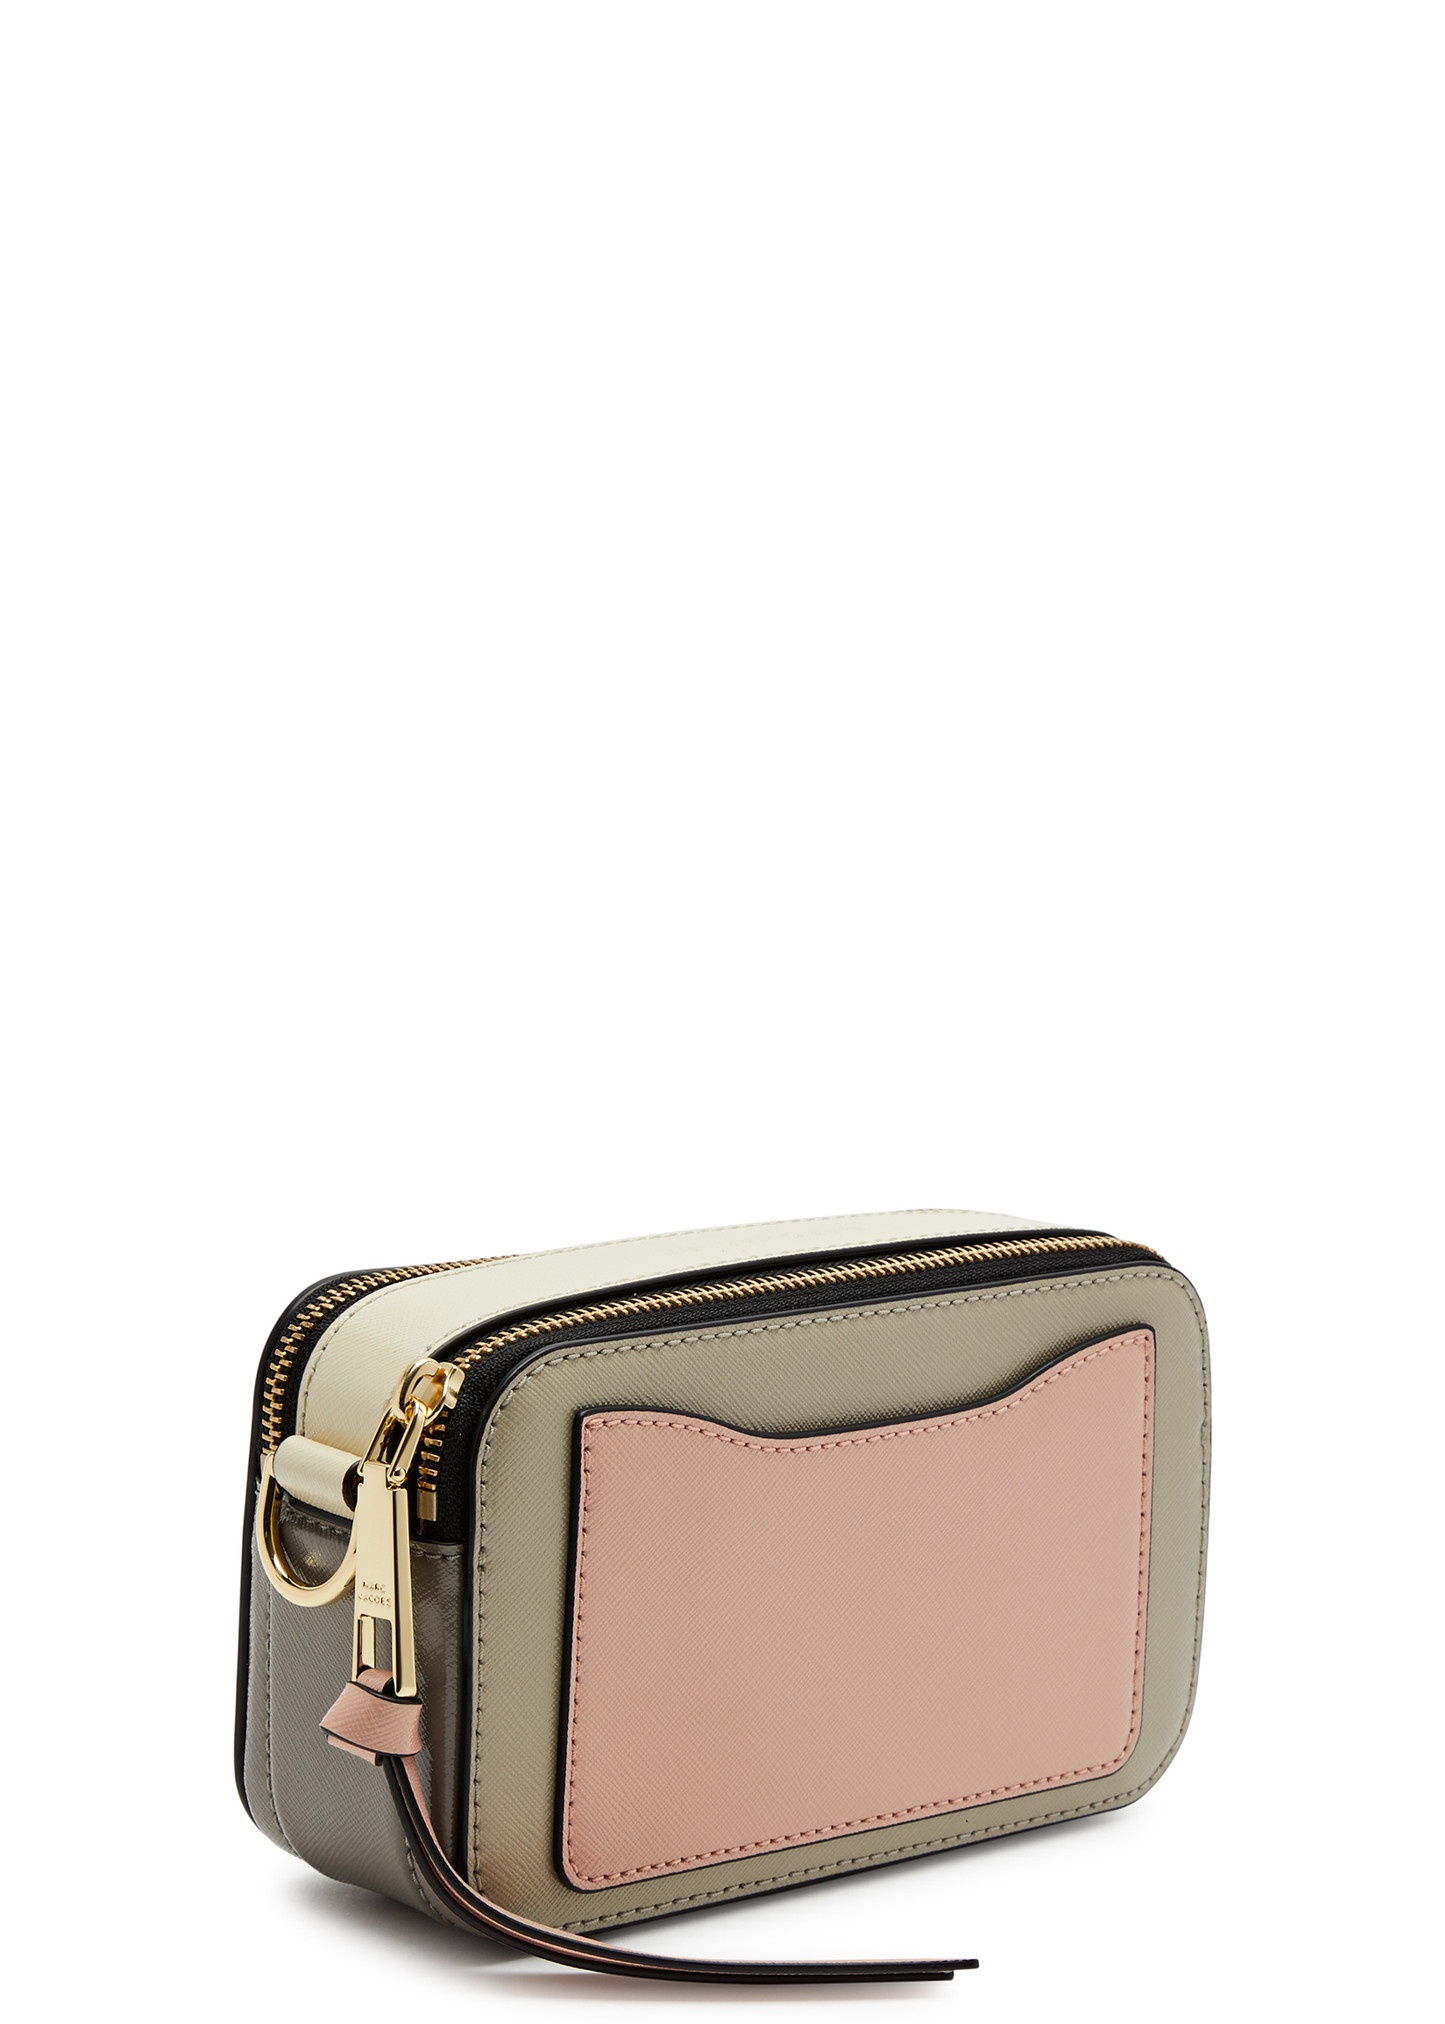 The Snapshot Core leather cross-body bag - 2